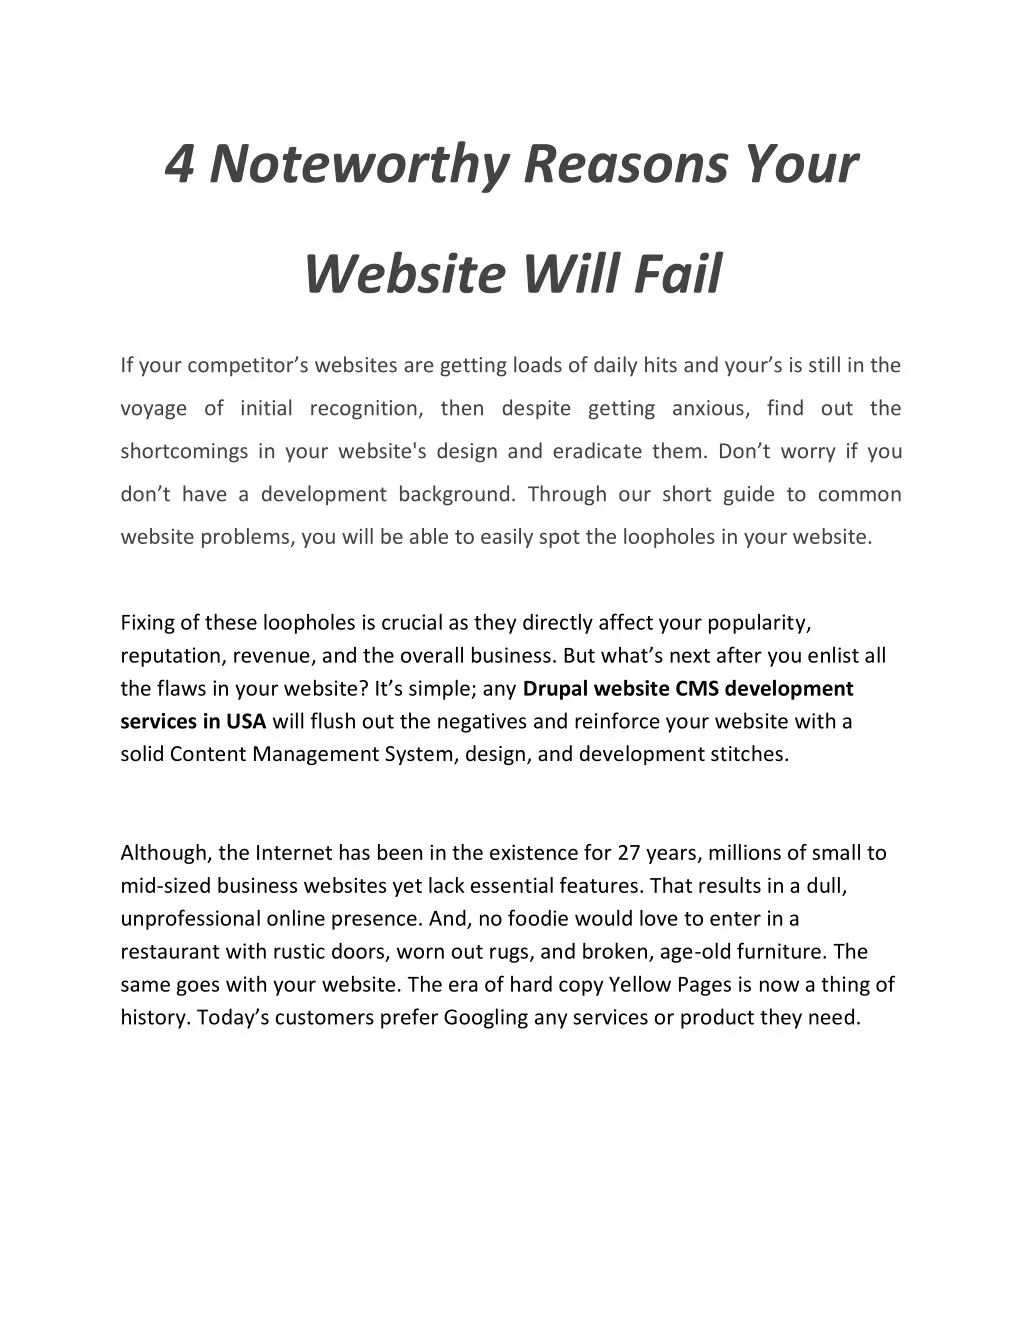 4 noteworthy reasons your